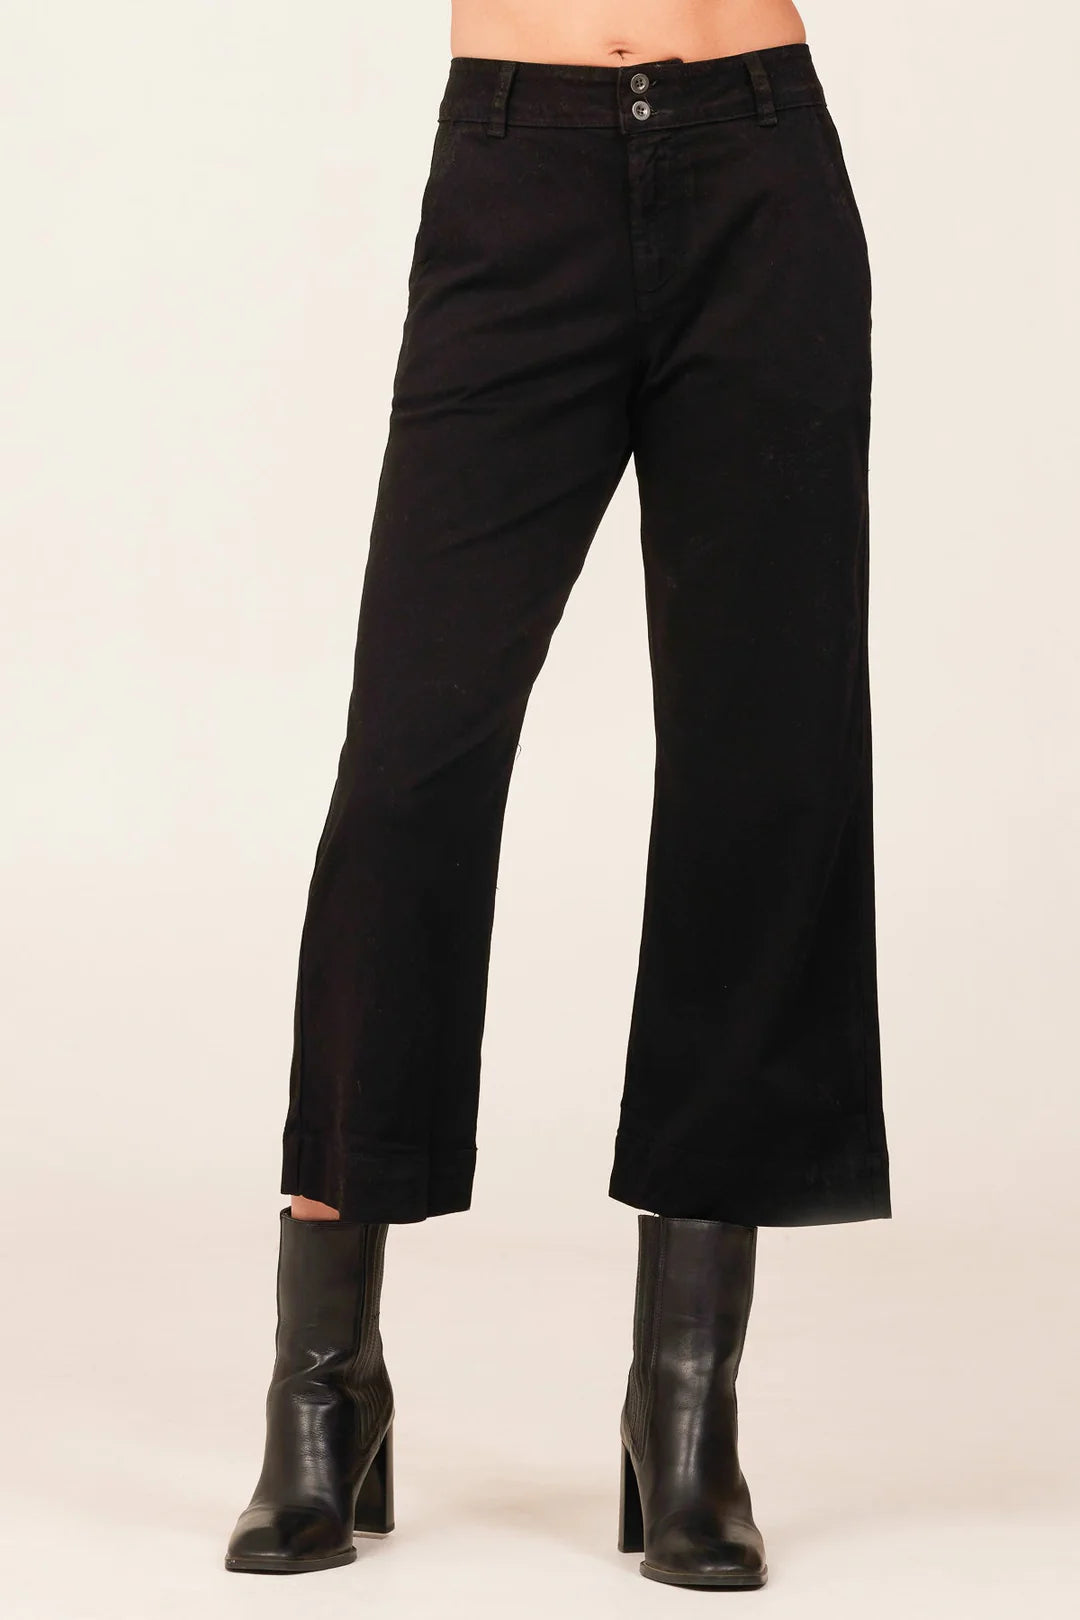 Cropped black wide leg trousers